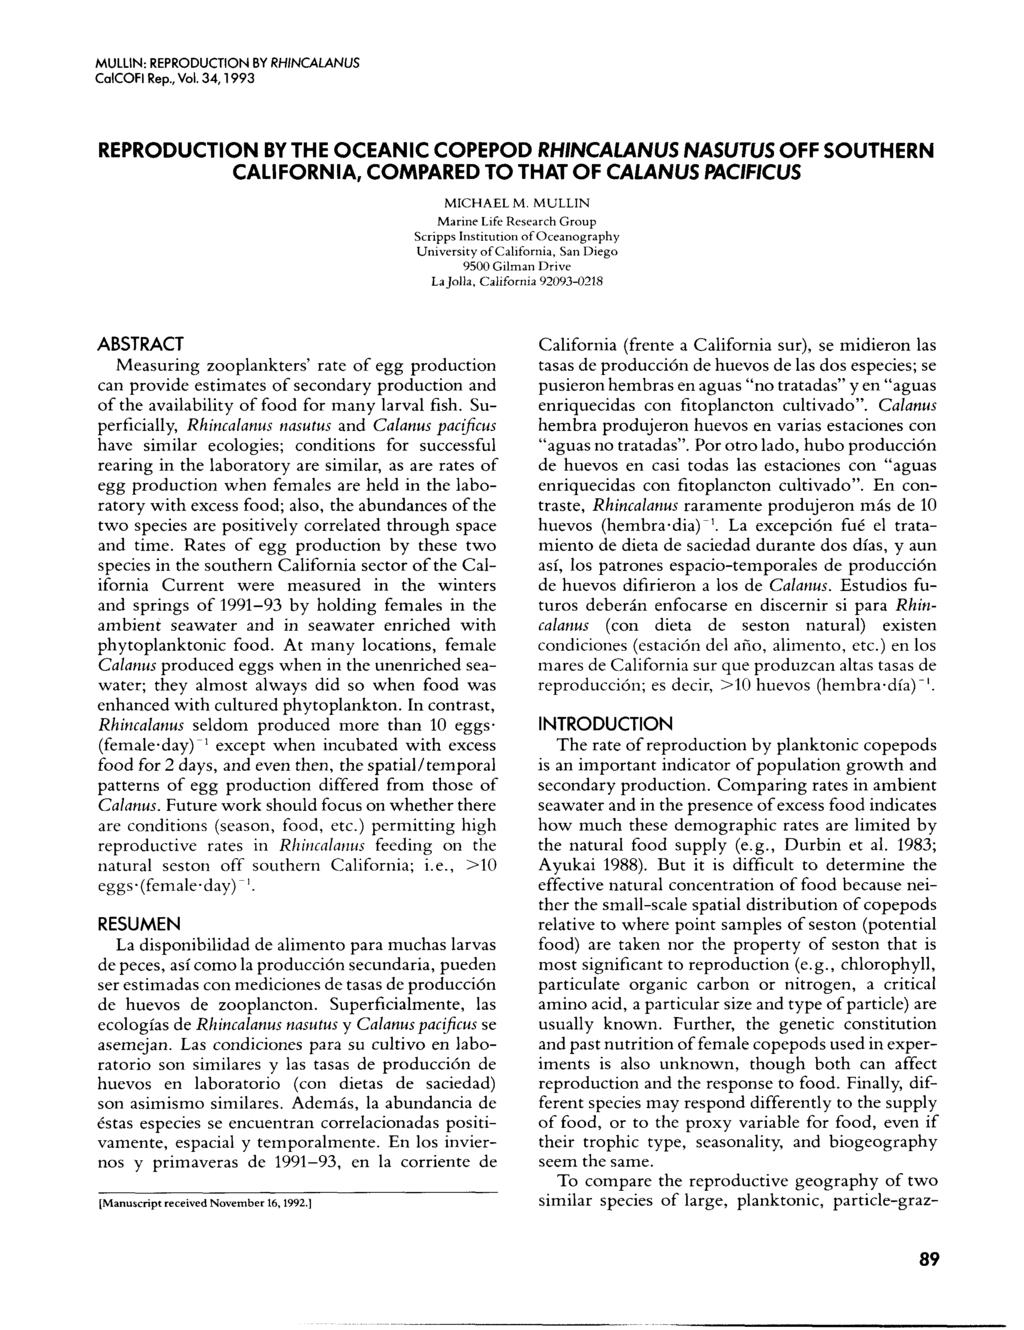 CalCOFl Rp., Vol. 4,99 REPRODUCTON BY THE OCEANC COPEPOD RHNCALANUS NASUTUS OFF SOUTHERN CALFORNA, COMPARED TO THAT OF CALANUS PACFCUS MCHAEL M.